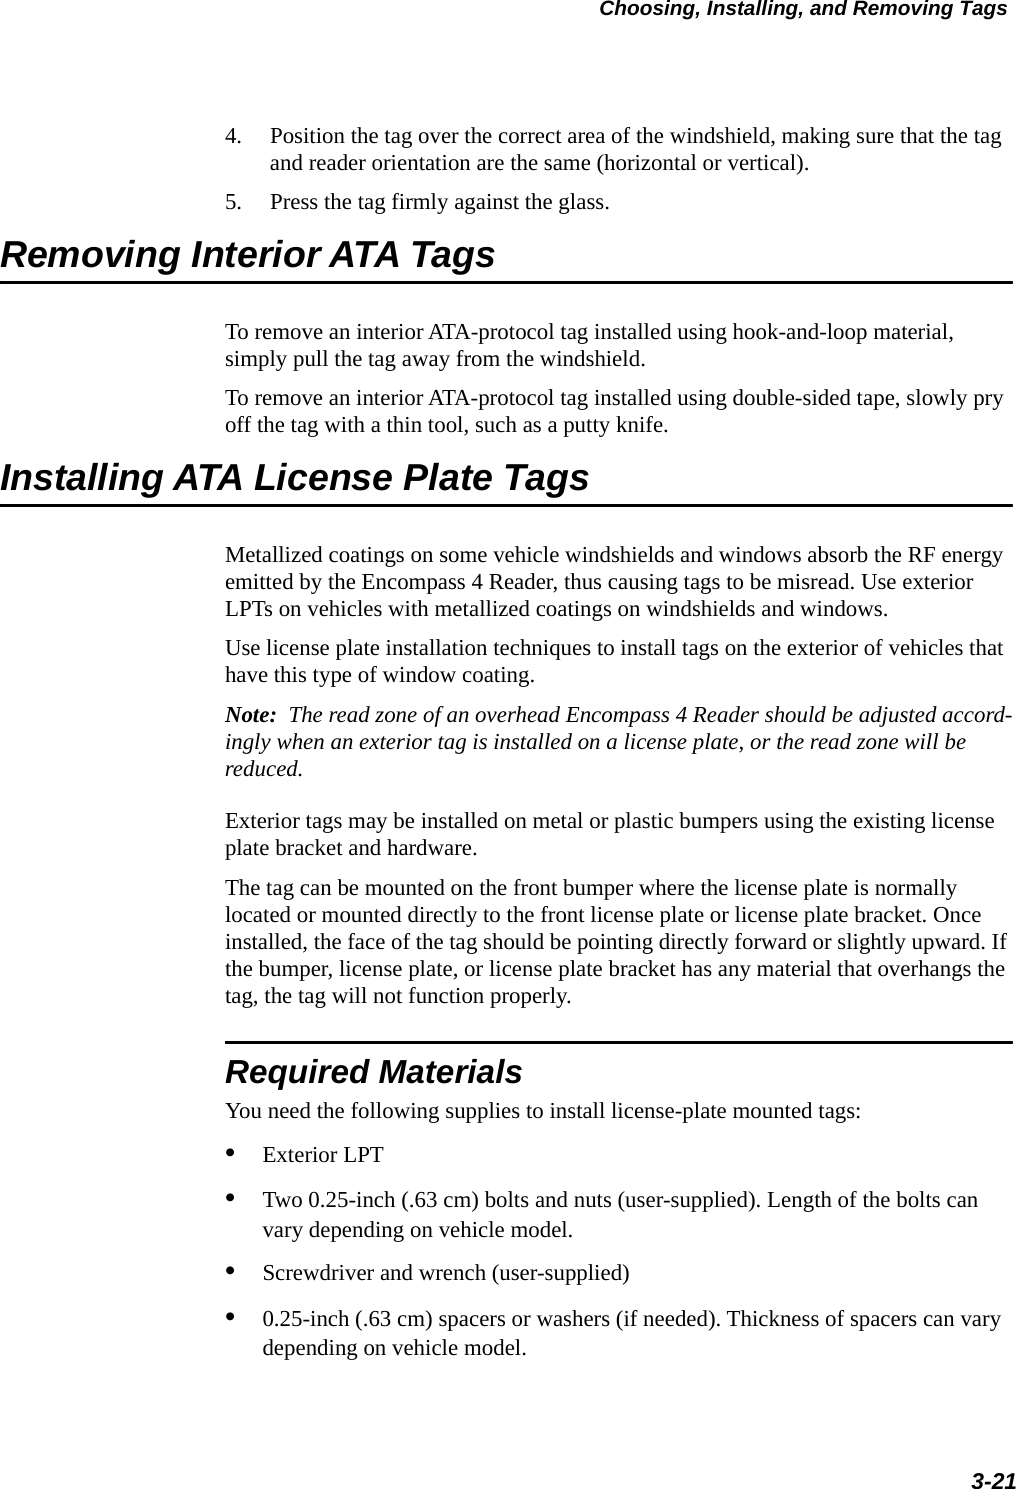 Choosing, Installing, and Removing Tags3-214. Position the tag over the correct area of the windshield, making sure that the tag and reader orientation are the same (horizontal or vertical).5. Press the tag firmly against the glass.Removing Interior ATA TagsTo remove an interior ATA-protocol tag installed using hook-and-loop material, simply pull the tag away from the windshield.To remove an interior ATA-protocol tag installed using double-sided tape, slowly pry off the tag with a thin tool, such as a putty knife.Installing ATA License Plate TagsMetallized coatings on some vehicle windshields and windows absorb the RF energy emitted by the Encompass 4 Reader, thus causing tags to be misread. Use exterior LPTs on vehicles with metallized coatings on windshields and windows.Use license plate installation techniques to install tags on the exterior of vehicles that have this type of window coating.Note:  The read zone of an overhead Encompass 4 Reader should be adjusted accord-ingly when an exterior tag is installed on a license plate, or the read zone will be reduced.Exterior tags may be installed on metal or plastic bumpers using the existing license plate bracket and hardware. The tag can be mounted on the front bumper where the license plate is normally located or mounted directly to the front license plate or license plate bracket. Once installed, the face of the tag should be pointing directly forward or slightly upward. If the bumper, license plate, or license plate bracket has any material that overhangs the tag, the tag will not function properly. Required MaterialsYou need the following supplies to install license-plate mounted tags:•Exterior LPT•Two 0.25-inch (.63 cm) bolts and nuts (user-supplied). Length of the bolts can vary depending on vehicle model. •Screwdriver and wrench (user-supplied) •0.25-inch (.63 cm) spacers or washers (if needed). Thickness of spacers can vary depending on vehicle model.